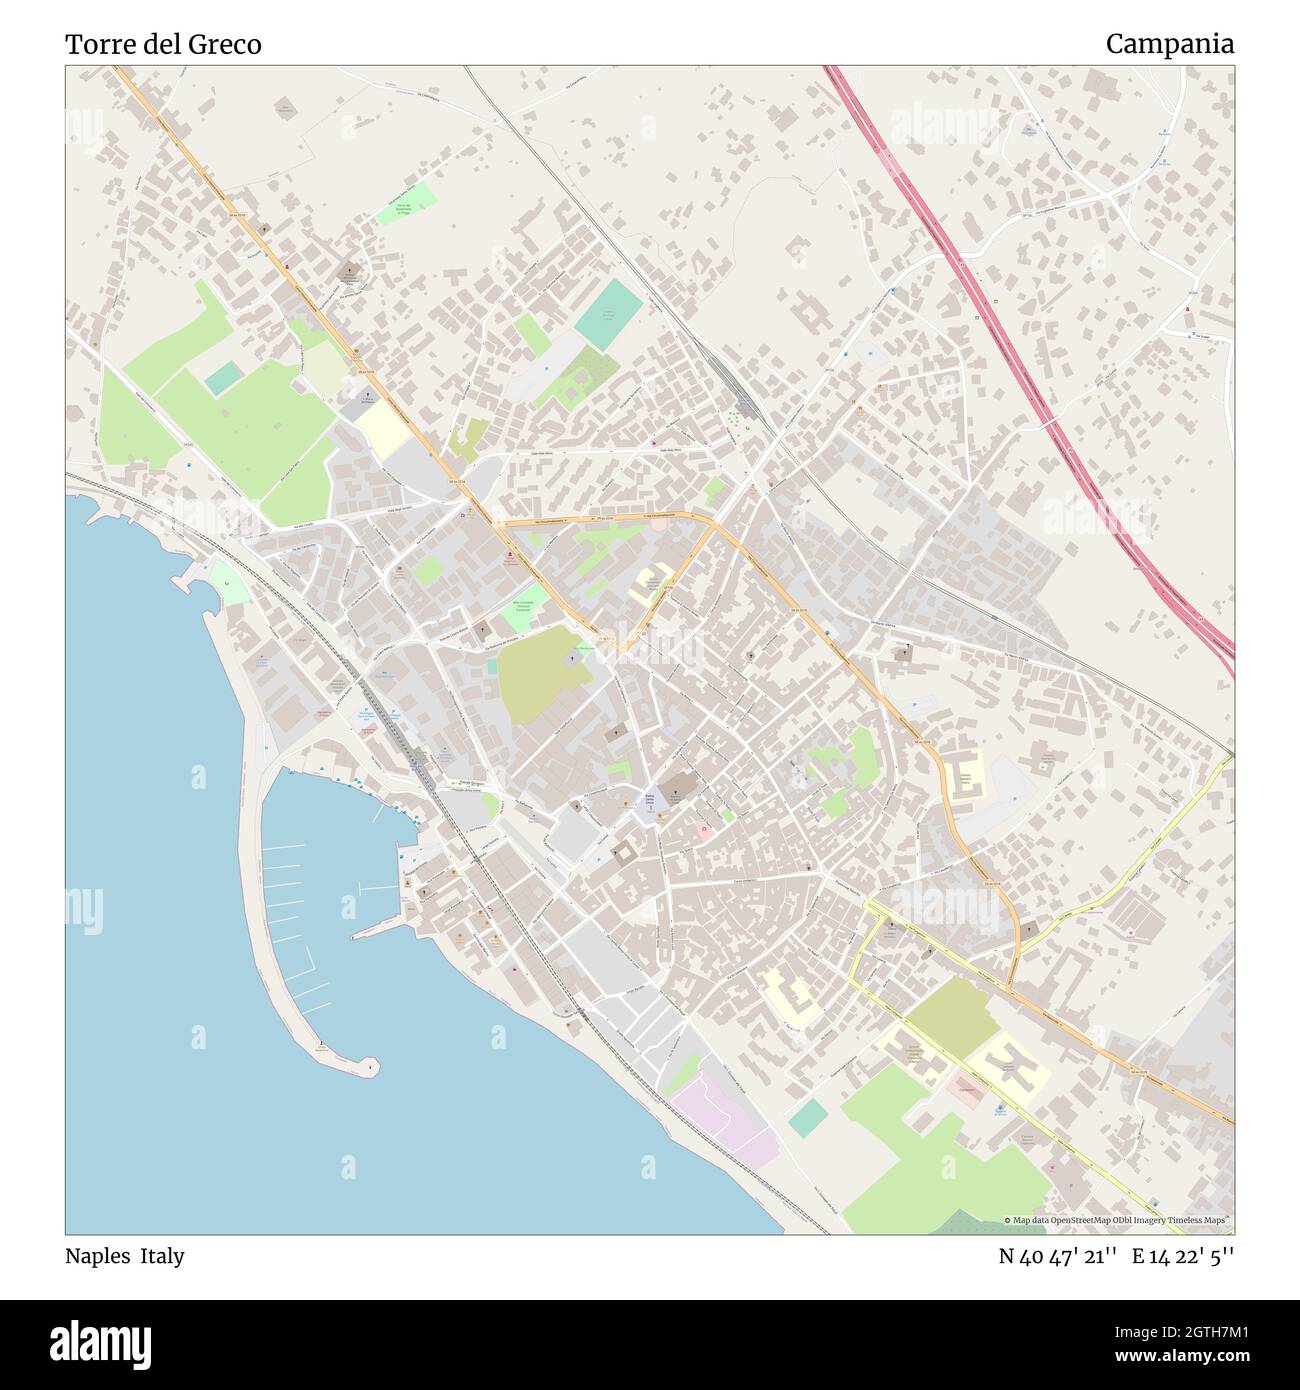 Torre del Greco, Naples, Italy, Campania, N 40 47' 21'', E 14 22' 5'', map, Timeless Map published in 2021. Travelers, explorers and adventurers like Florence Nightingale, David Livingstone, Ernest Shackleton, Lewis and Clark and Sherlock Holmes relied on maps to plan travels to the world's most remote corners, Timeless Maps is mapping most locations on the globe, showing the achievement of great dreams Stock Photo